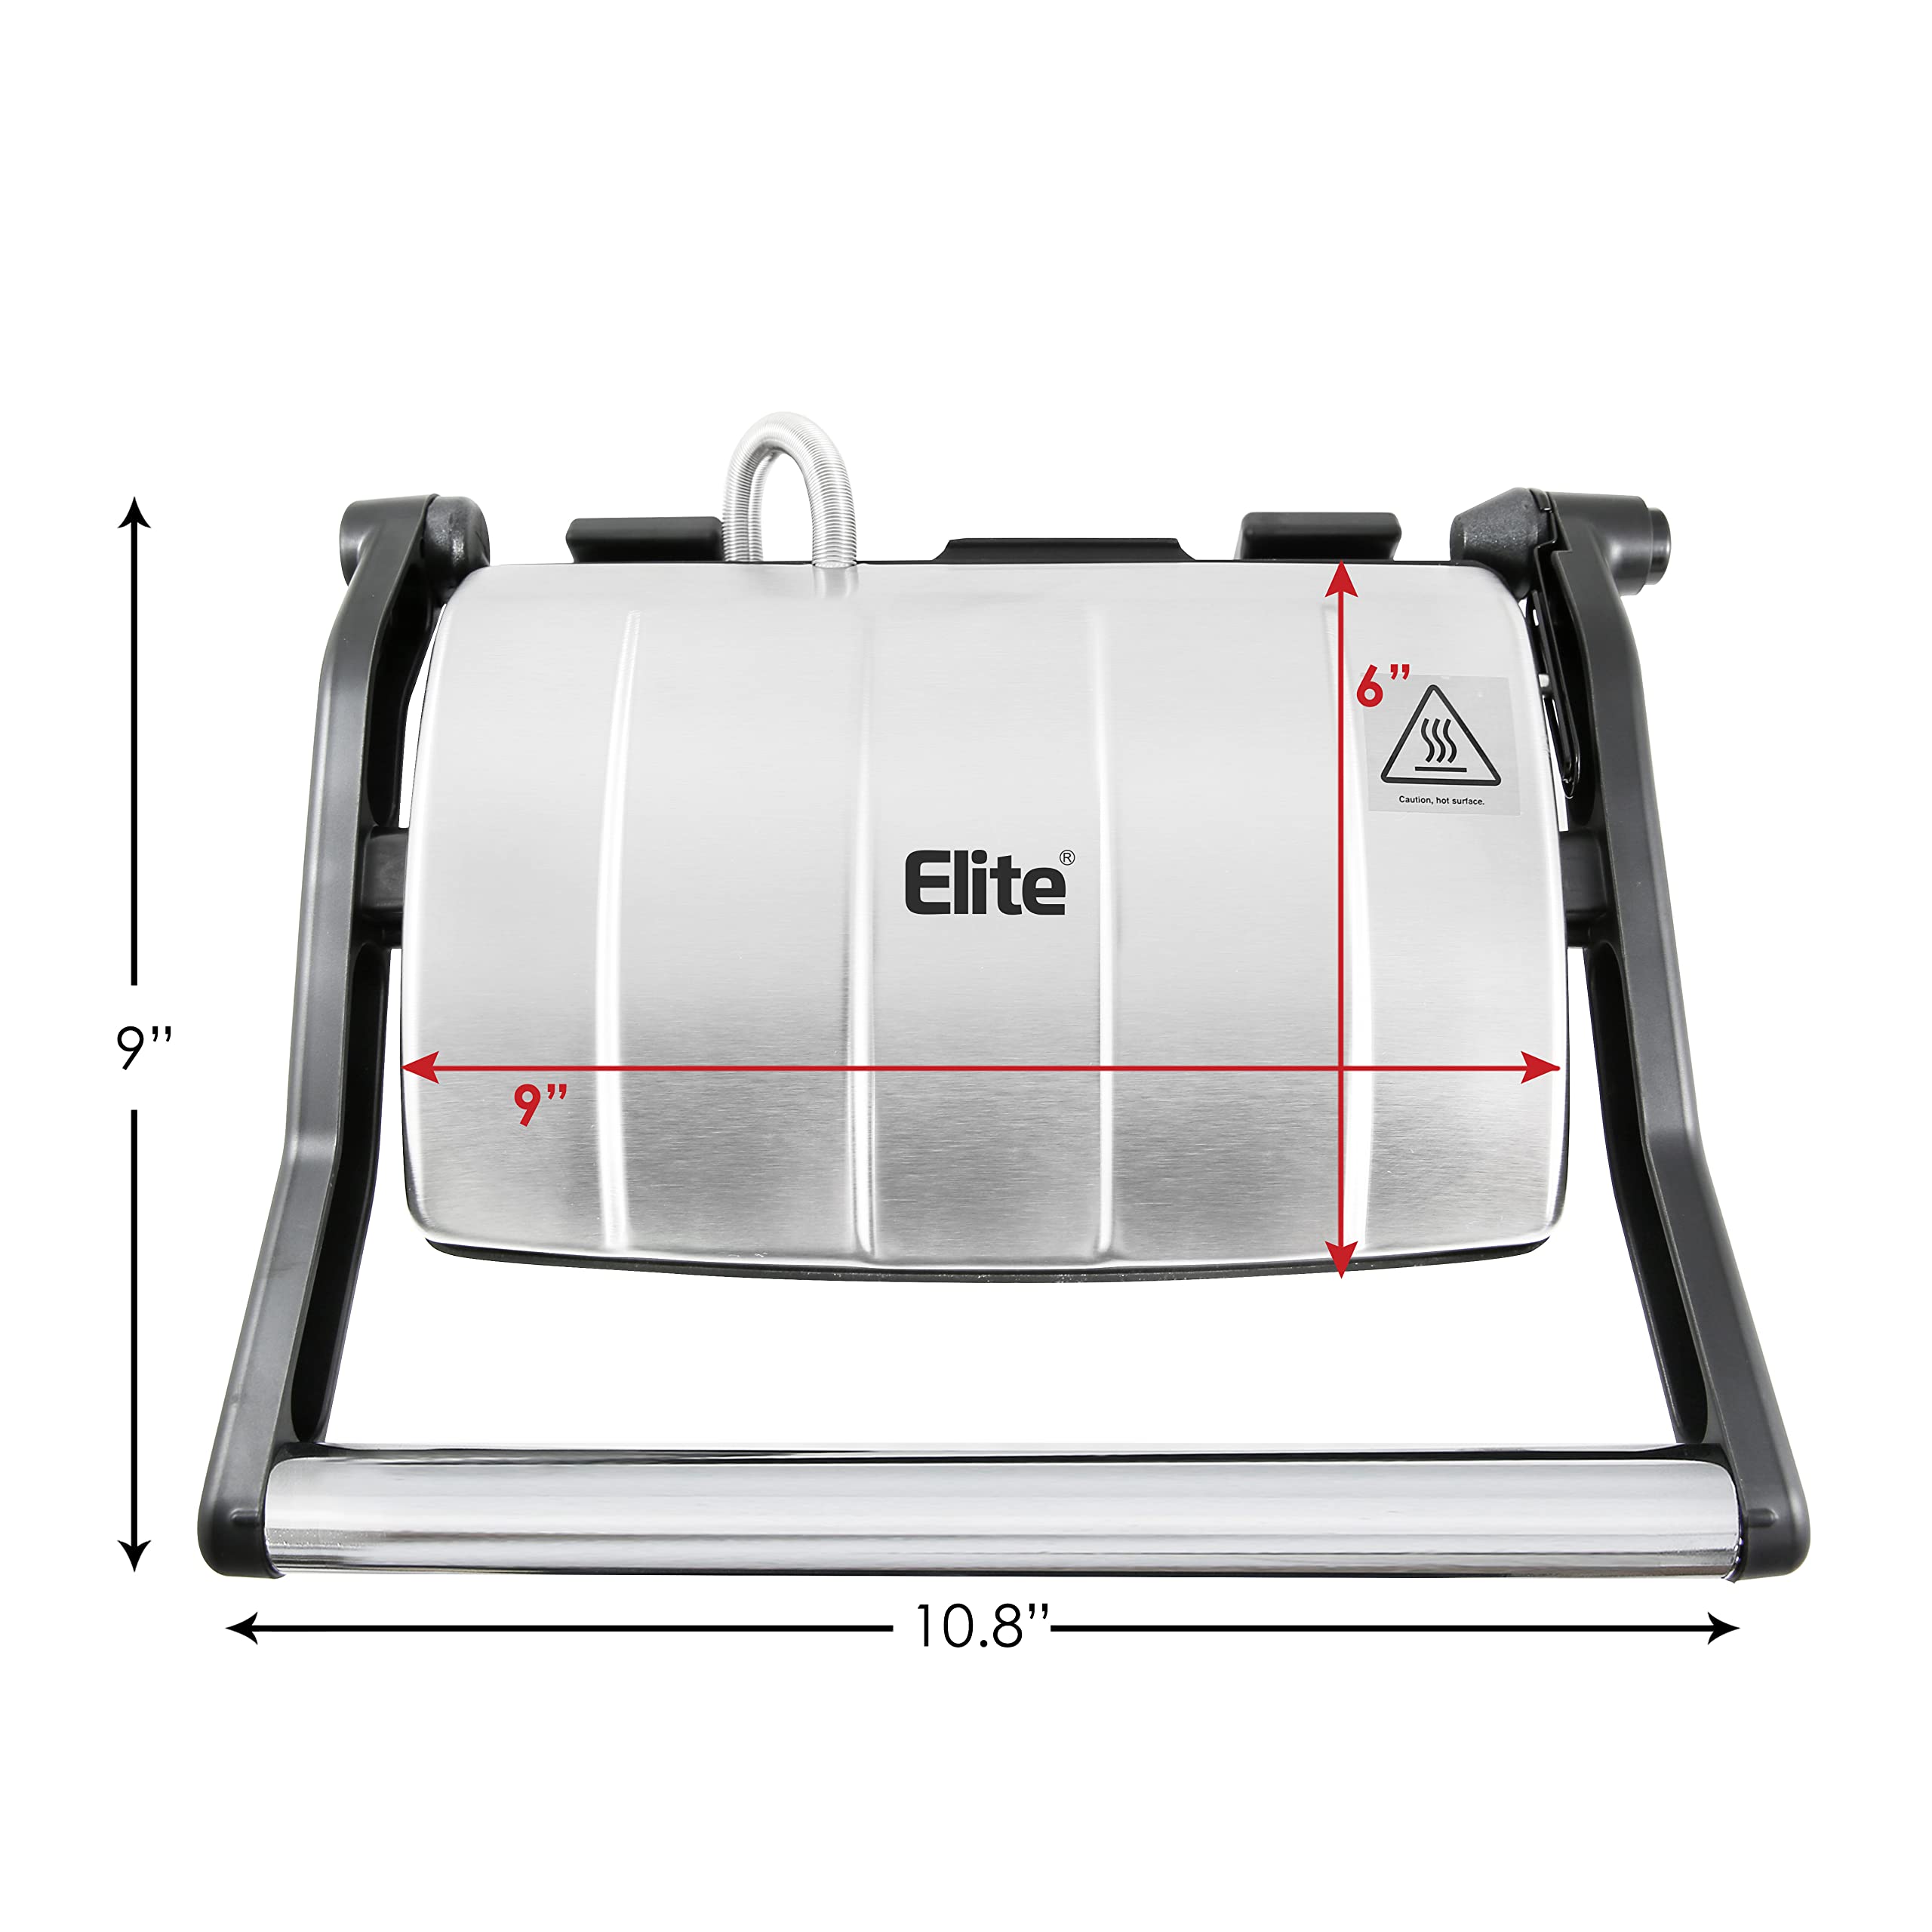 Elite Gourmet EPN-2976# 2-in-1 Nonstick Panini Press & Indoor Grill, Opens 180-Degree Gourmet Sandwich Maker, Floating Hinge Fits All Foods, Contact Grill with Removable Grease Tray